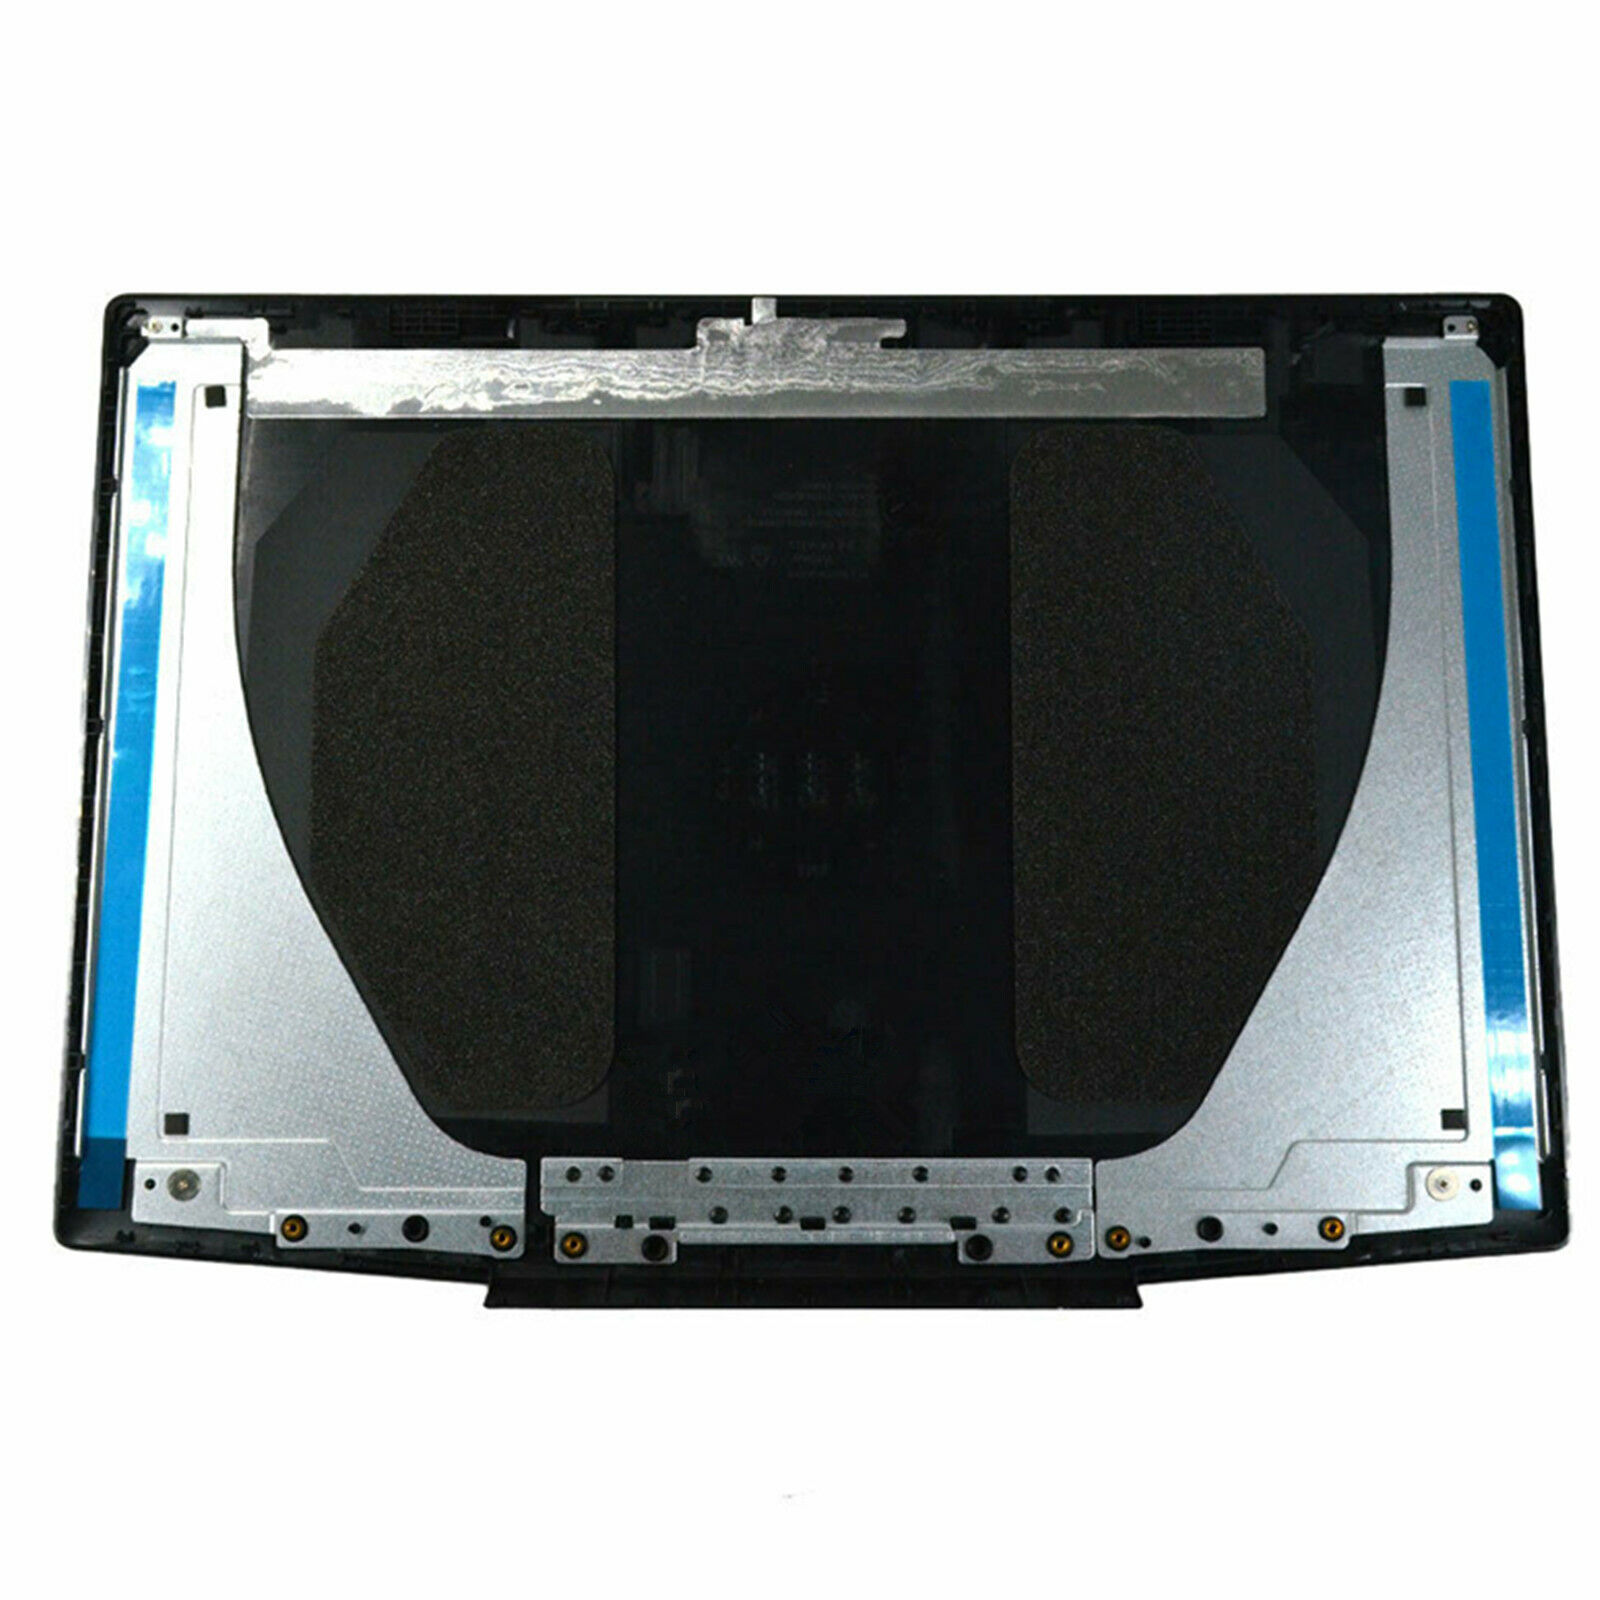 NEW LCD Back Cover For Dell G Series G3 15 3590 Rear Lid Blue Logo 0747KP 747KP